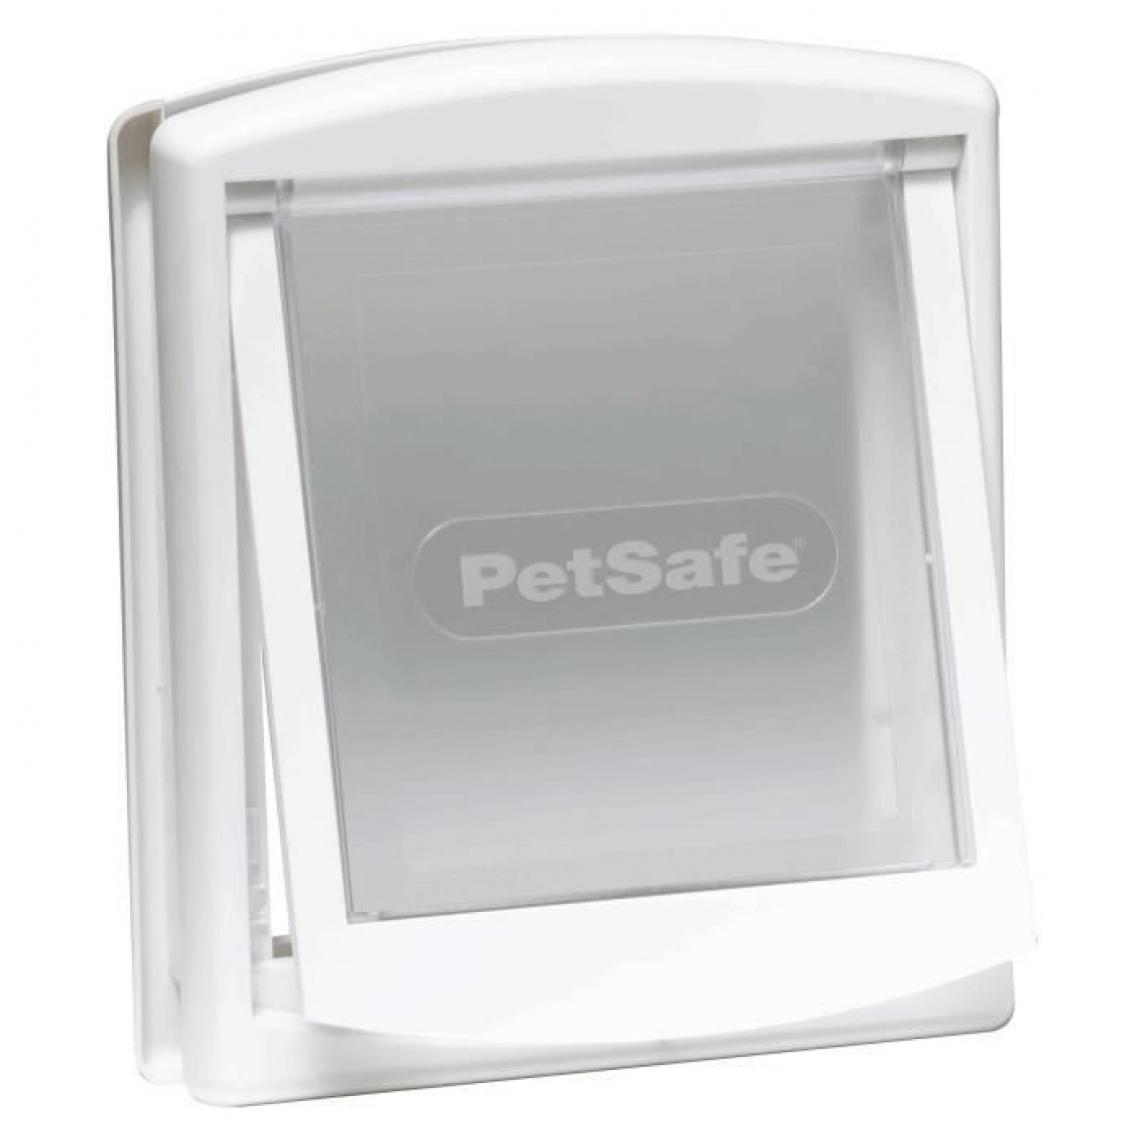 Icaverne - CHATIERE - PORTE POUR CHAT - TRAPPE CHAT Chatière Porte Staywell 2 Positions Blanc 715sgifd - - Chatière